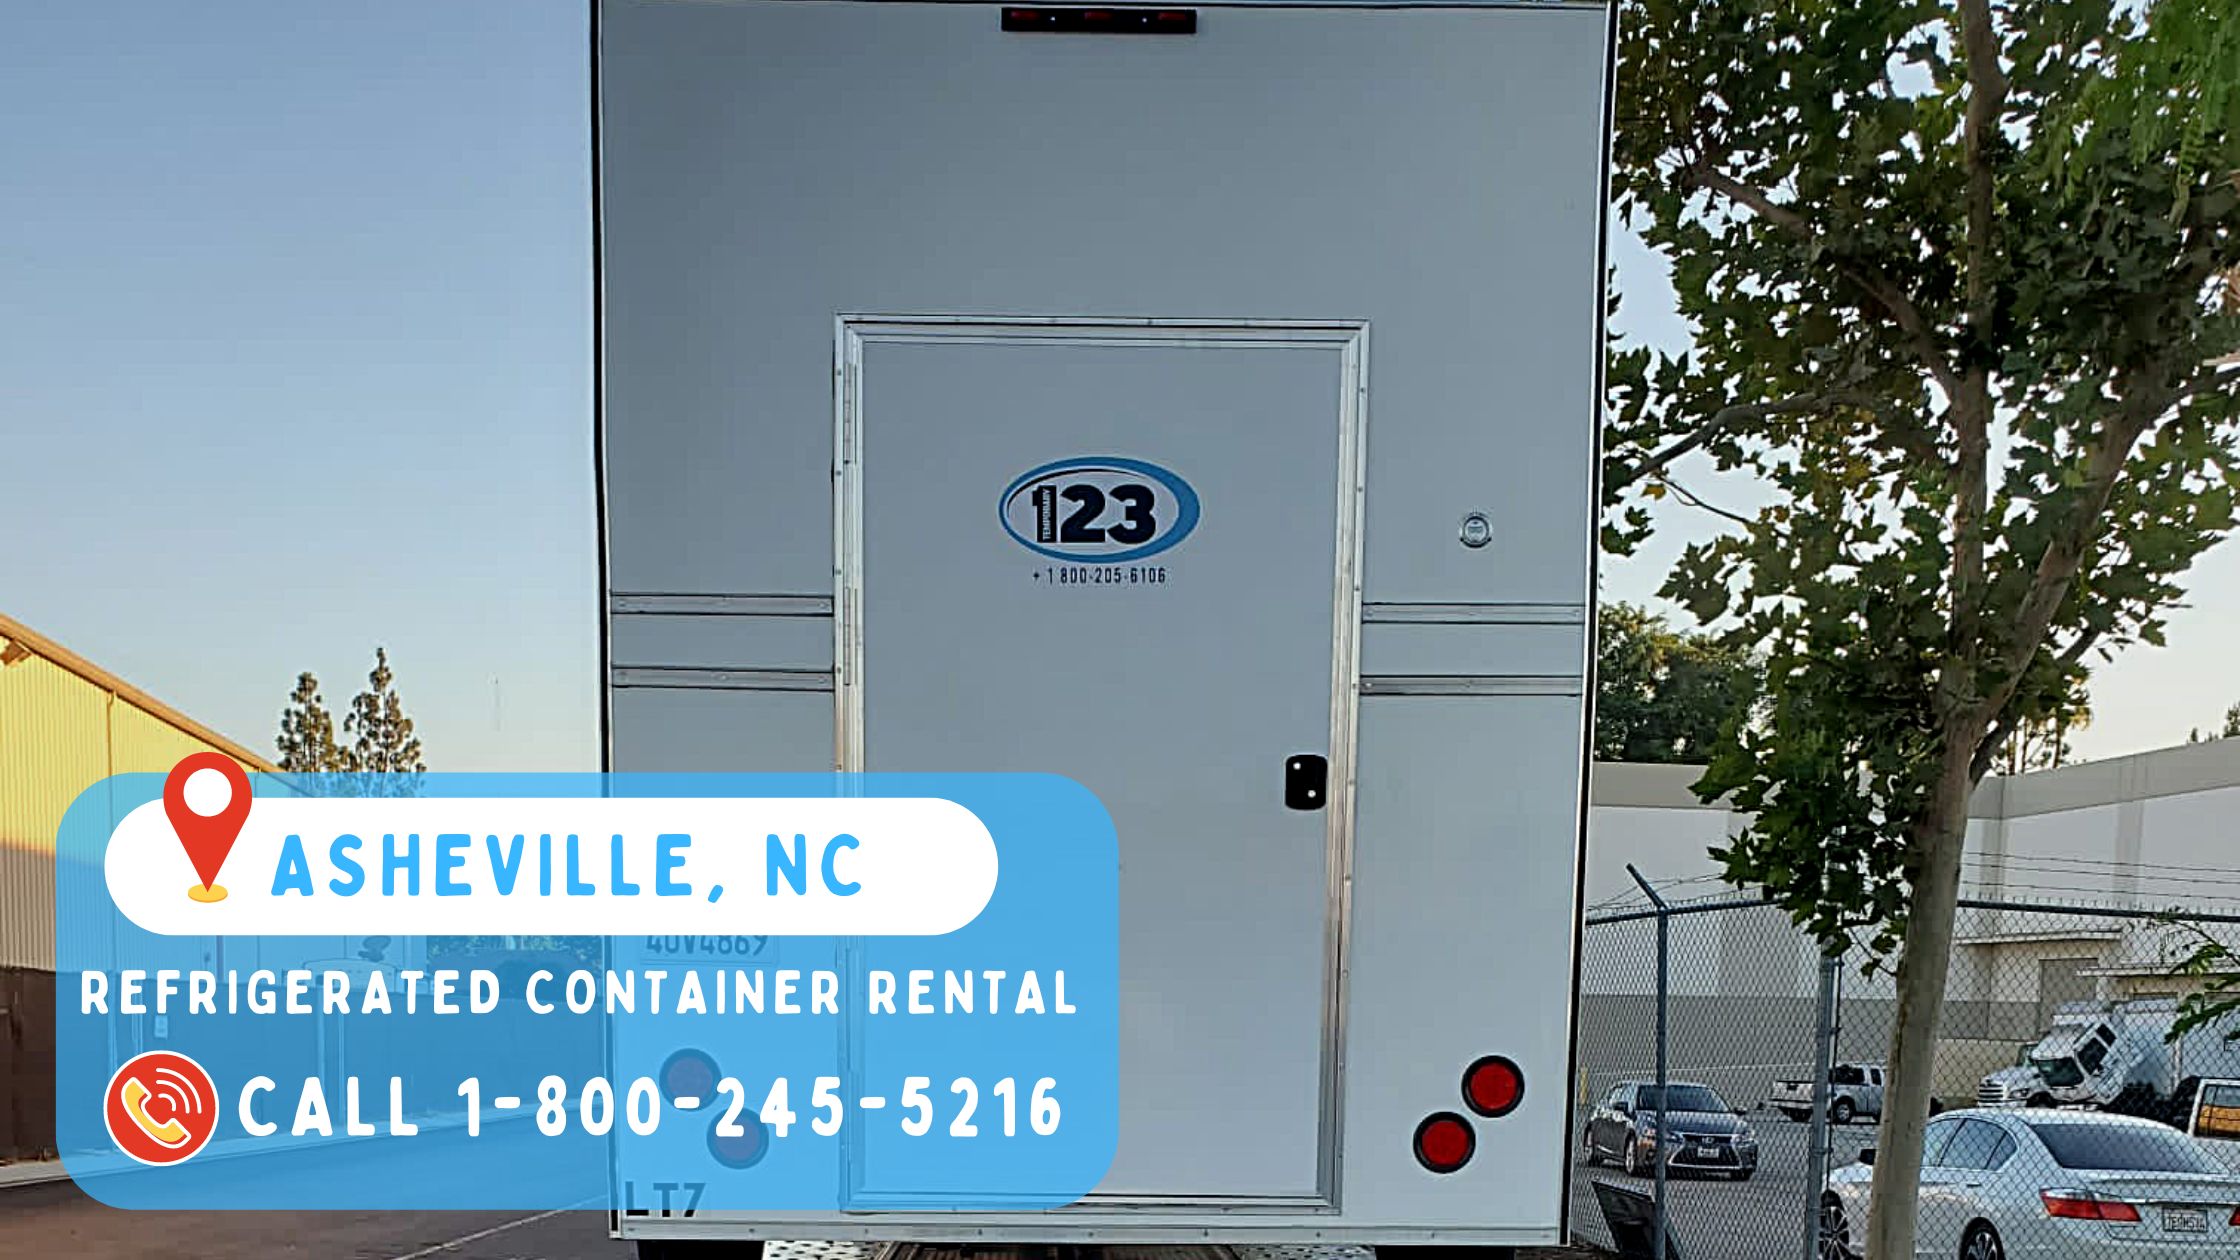 Refrigerated Container Rental in Asheville